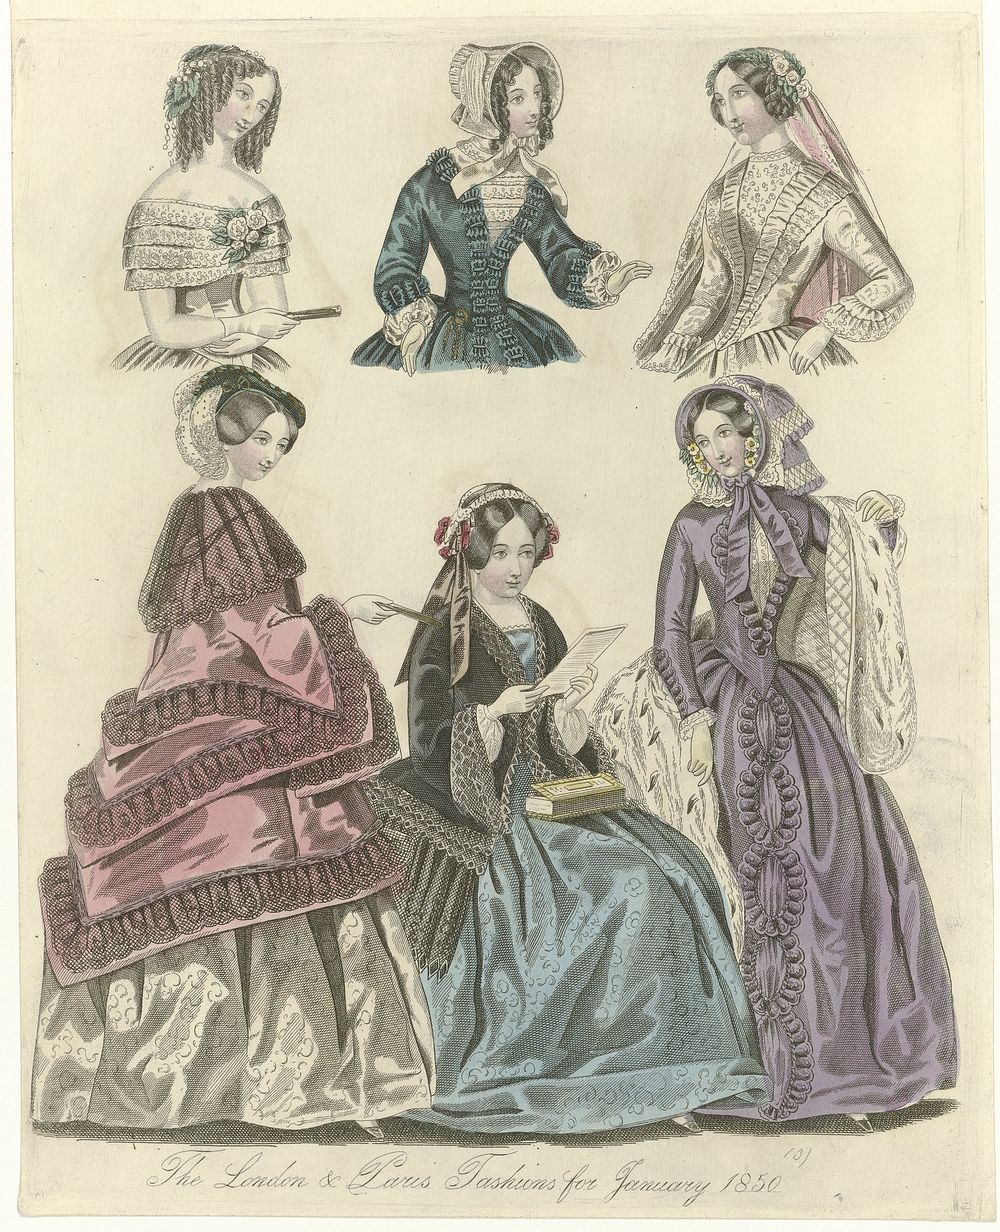 The World of Fashion, january 1850 : The London & Paris Fashions (...) (1850) by anonymous